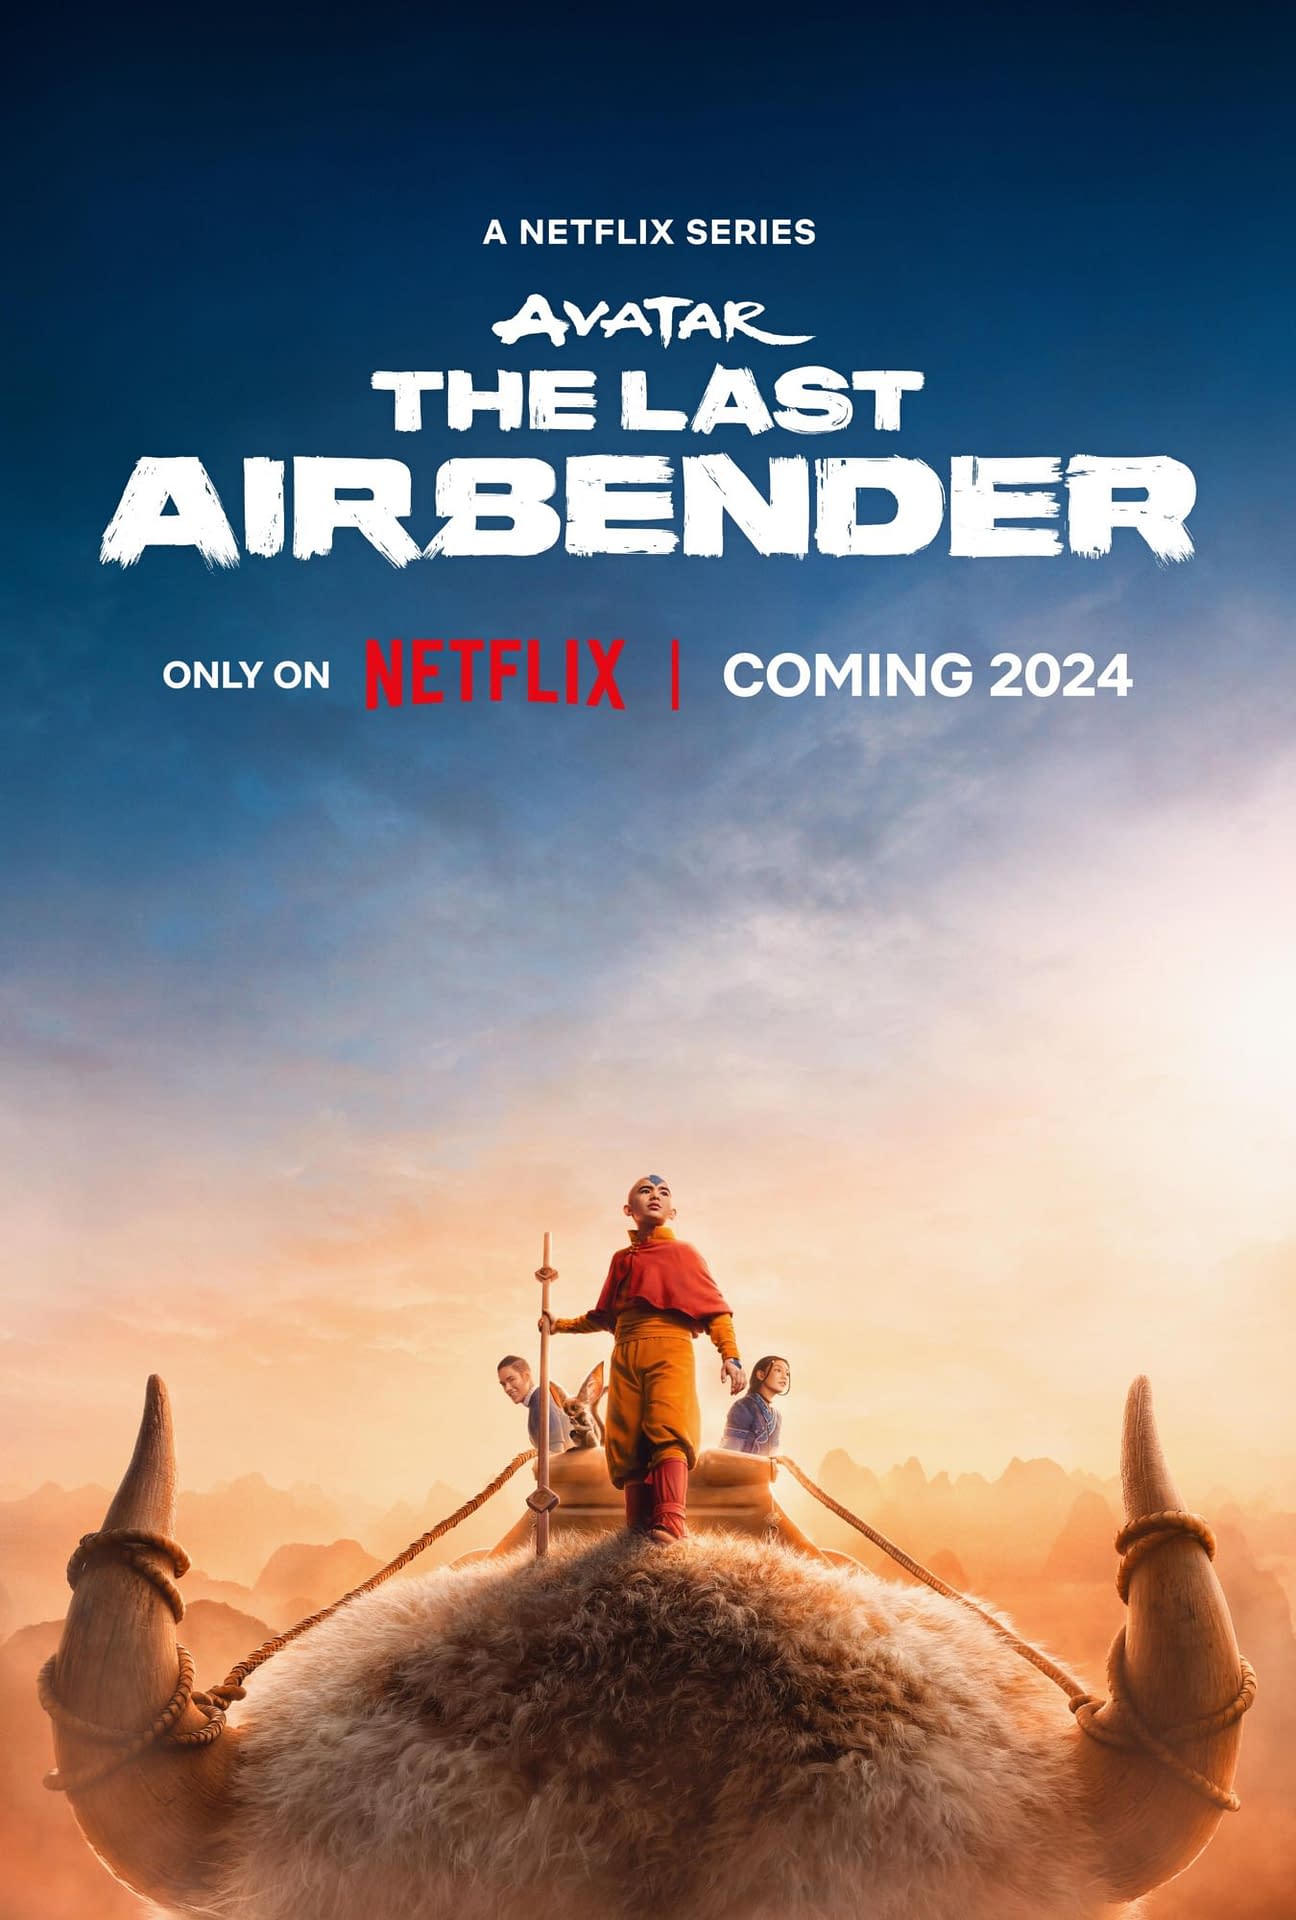 Avatar The Last Airbender "100 Days" Teaser Offers Fresh Look at Cast